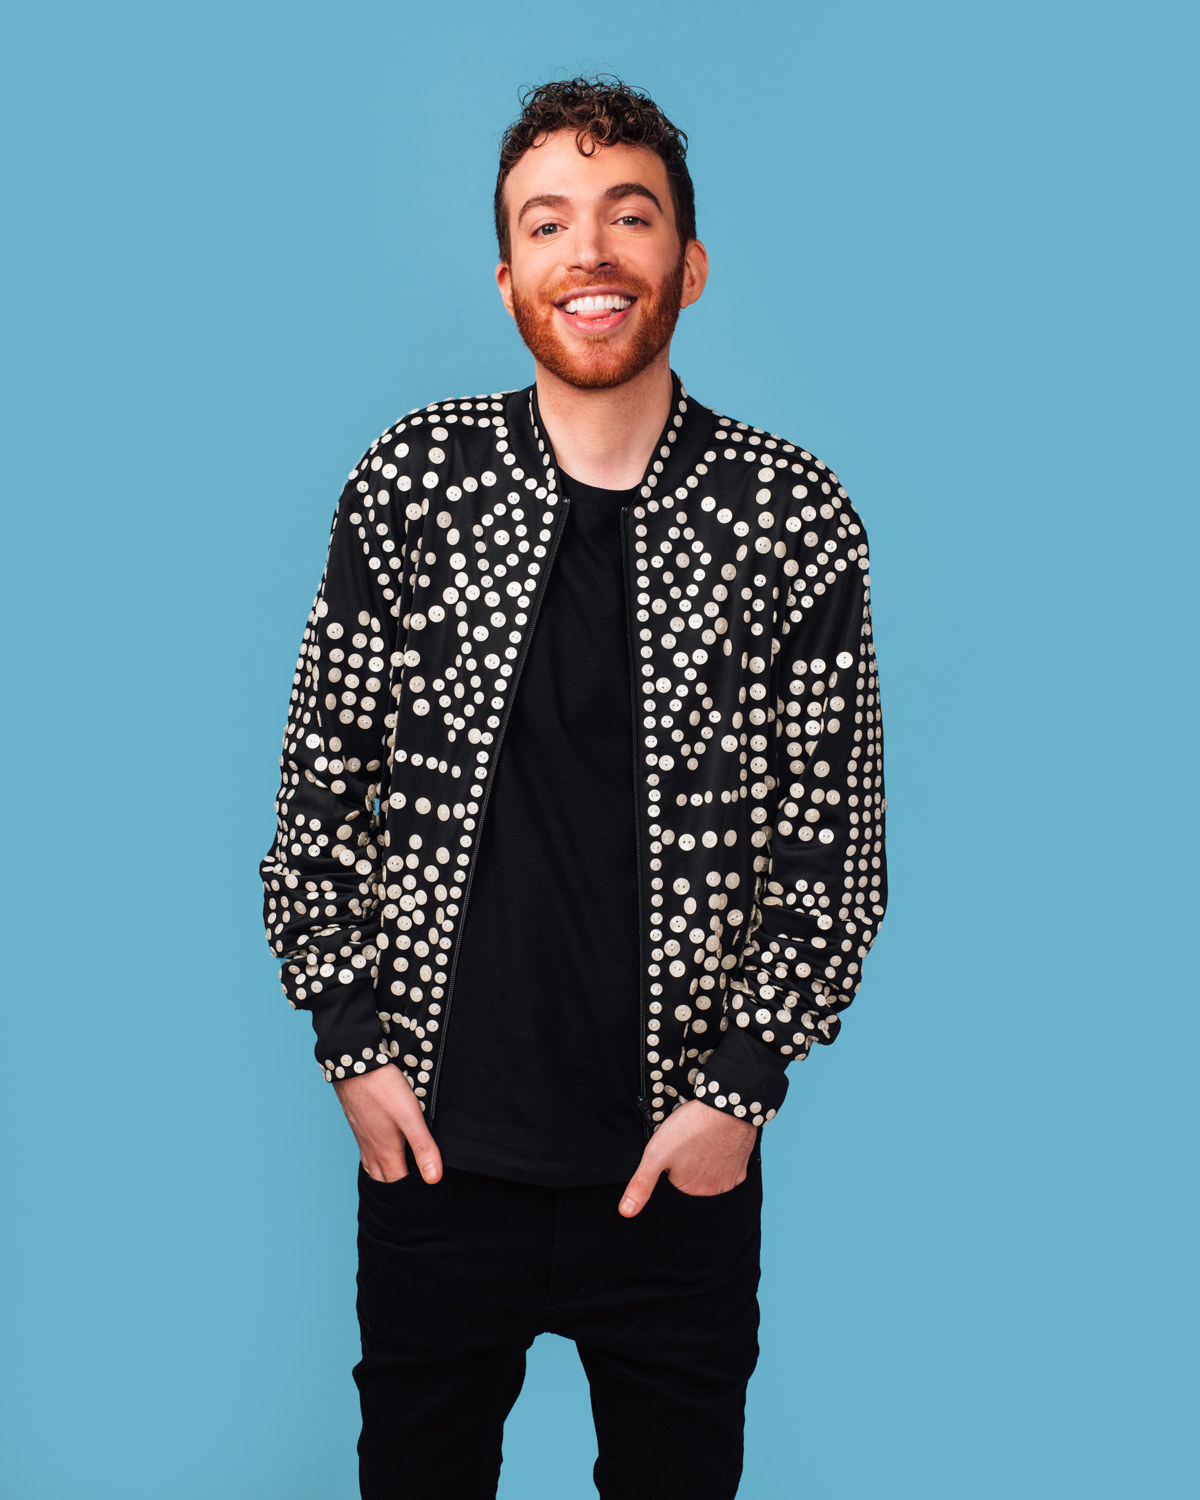 Josh smiles widely as they poses with both hands their pocket and rocks a polka dot jacket